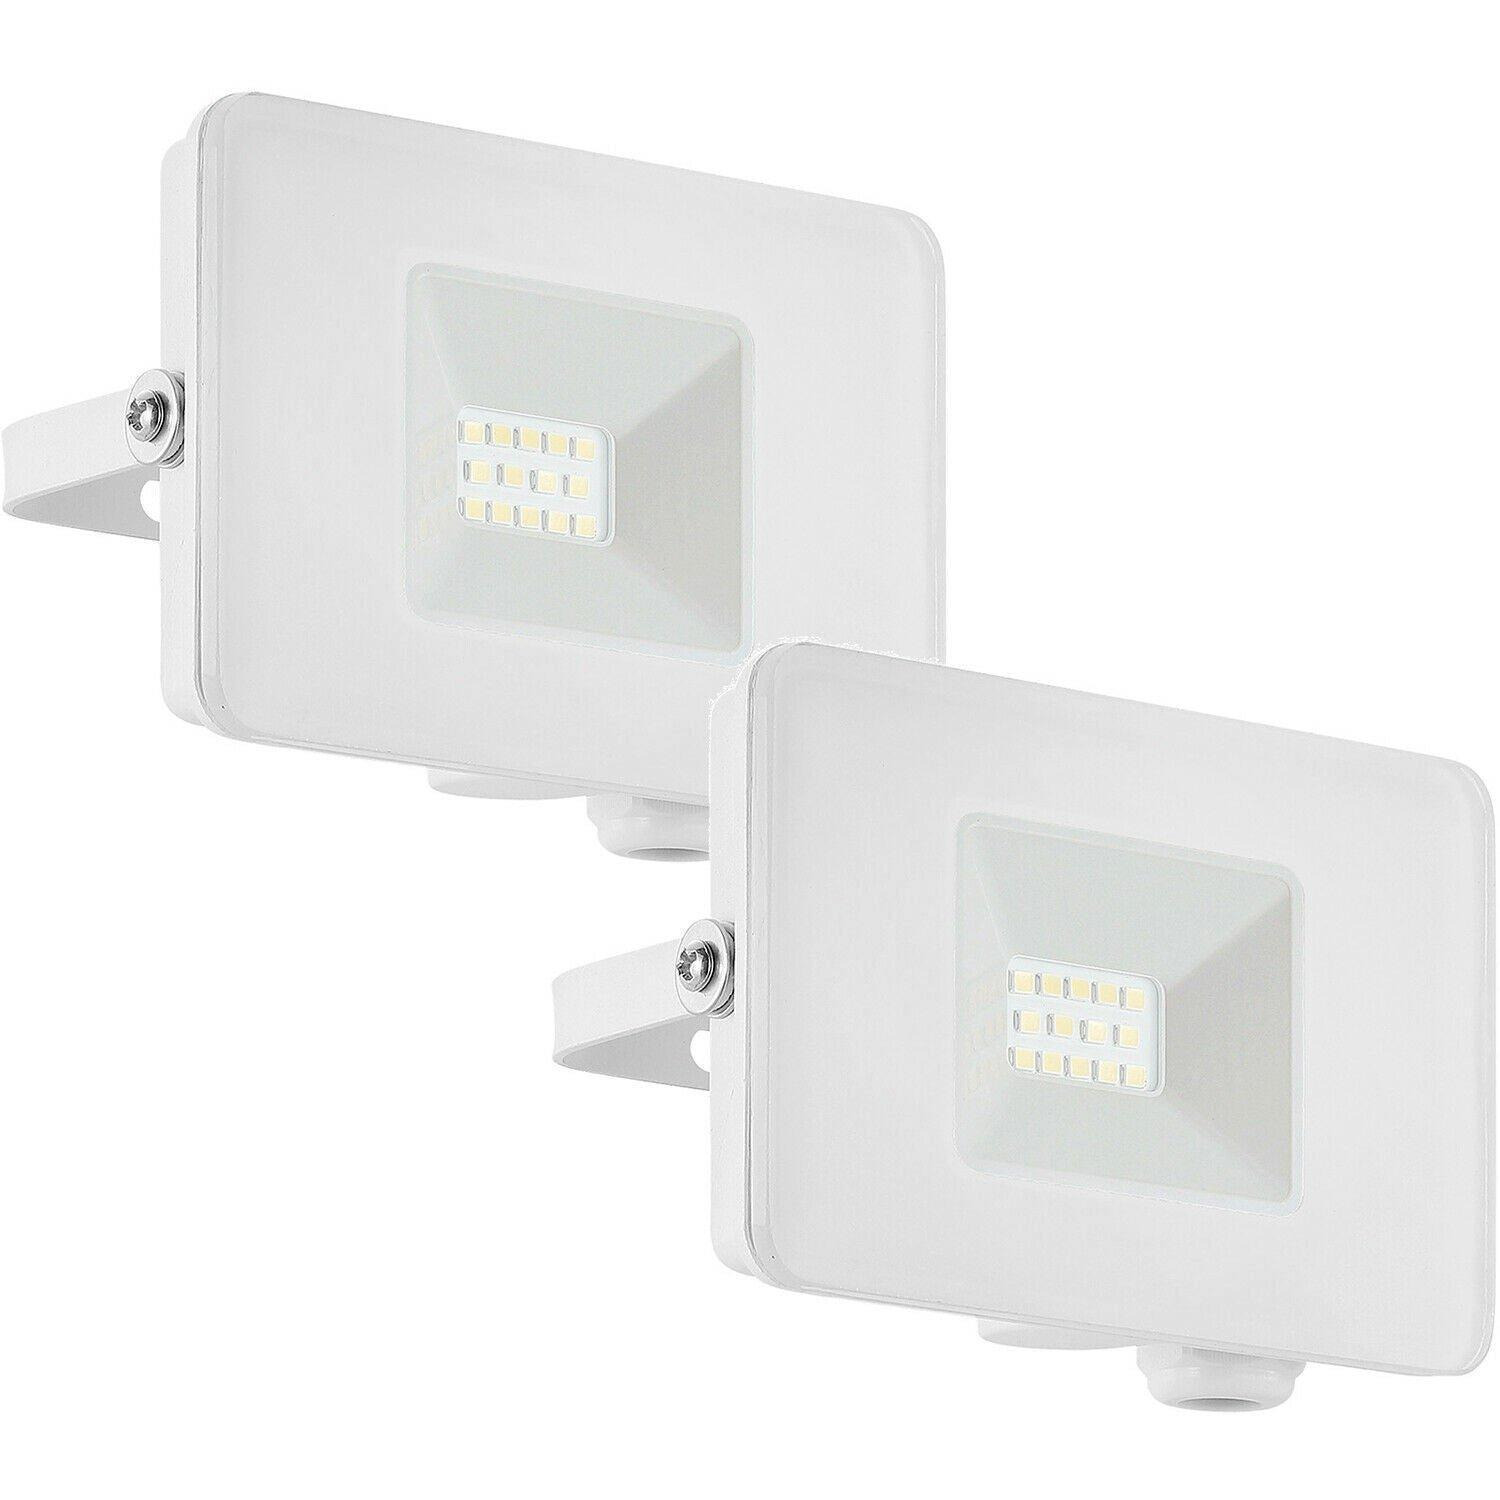 2 PACK IP65 Outdoor Wall Flood Light White Adjustable 10W LED Porch Lamp - image 1